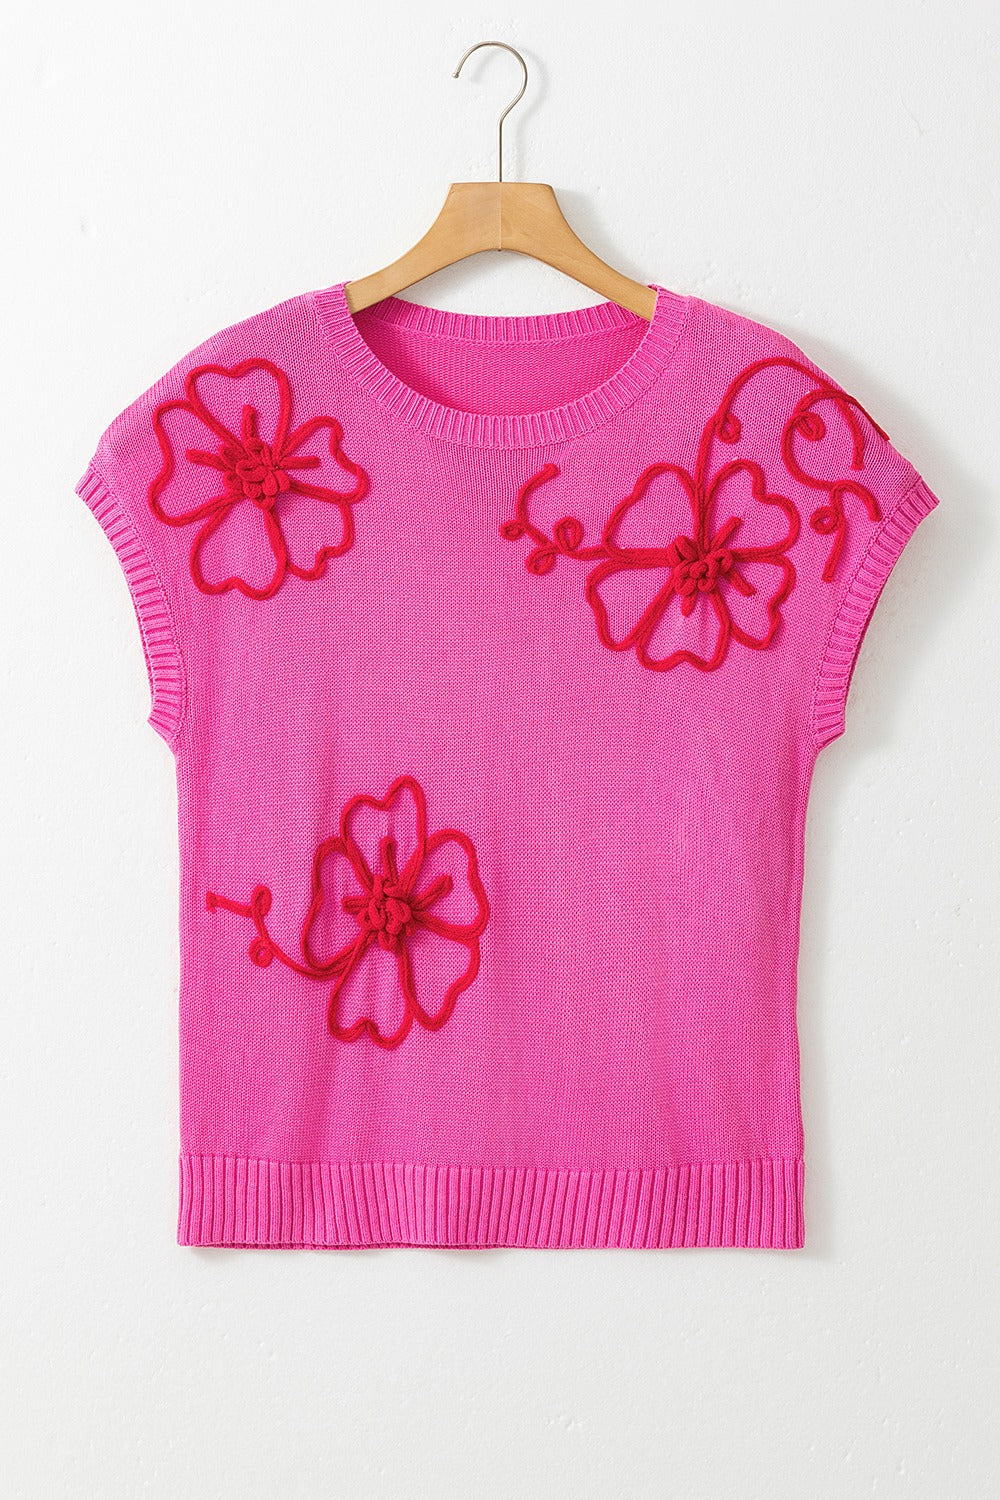 Everyday Party Knit Embroidered Top